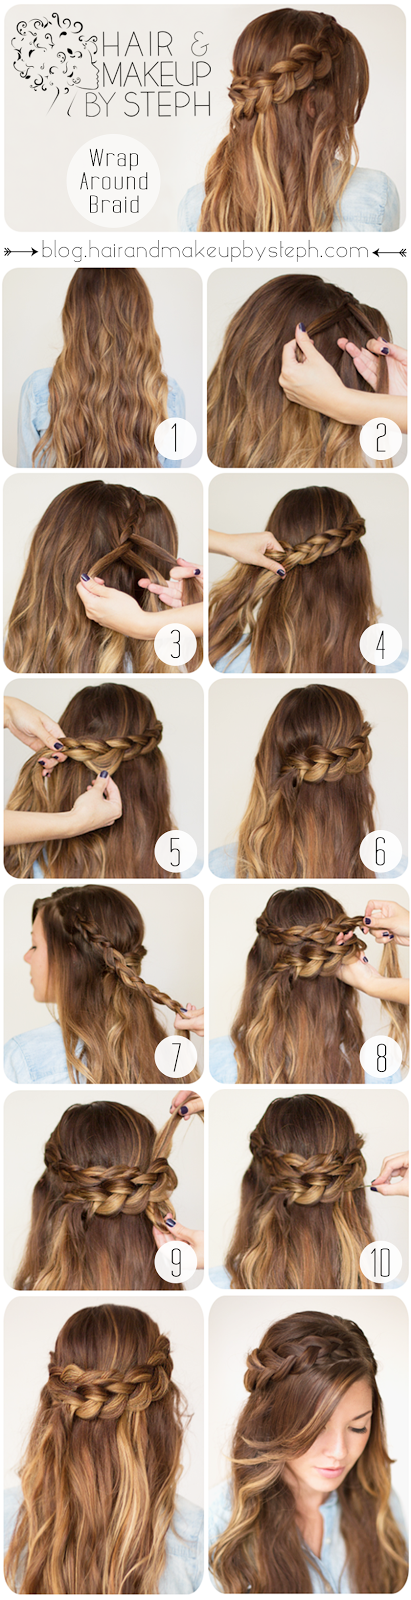 Hairstyles For Little Girls Step By Step